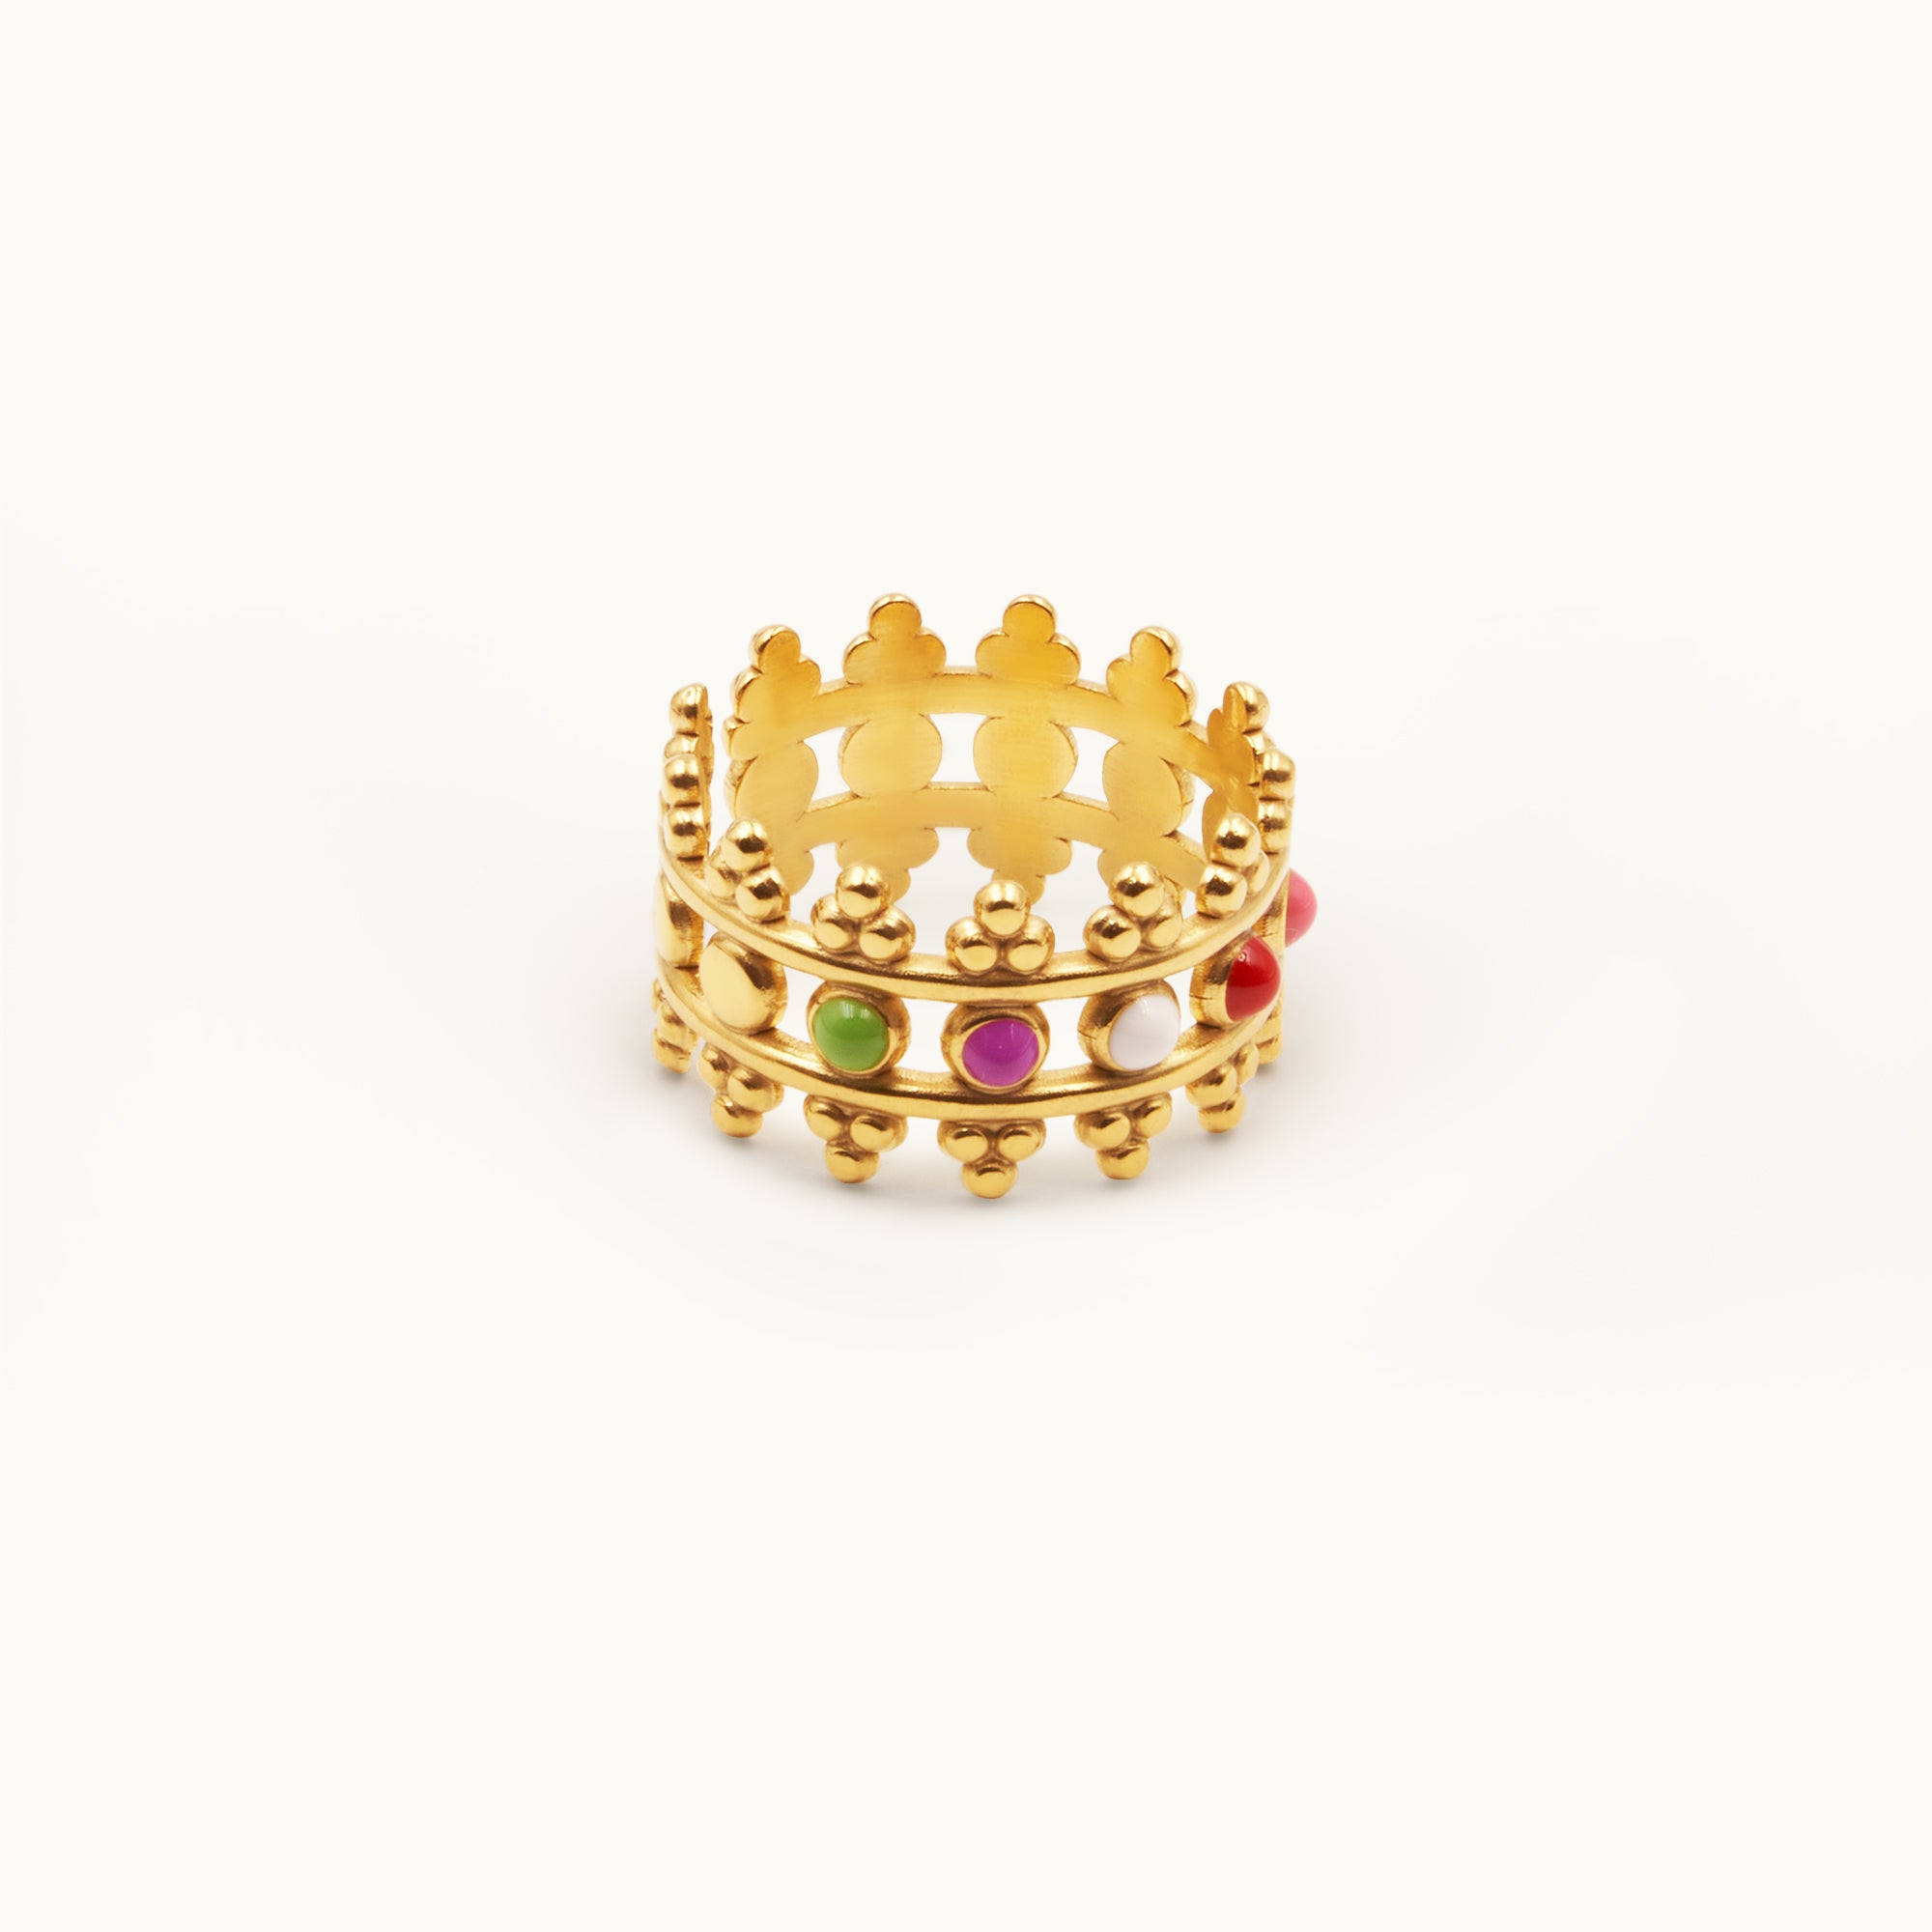 COLORFUL CROWN RING